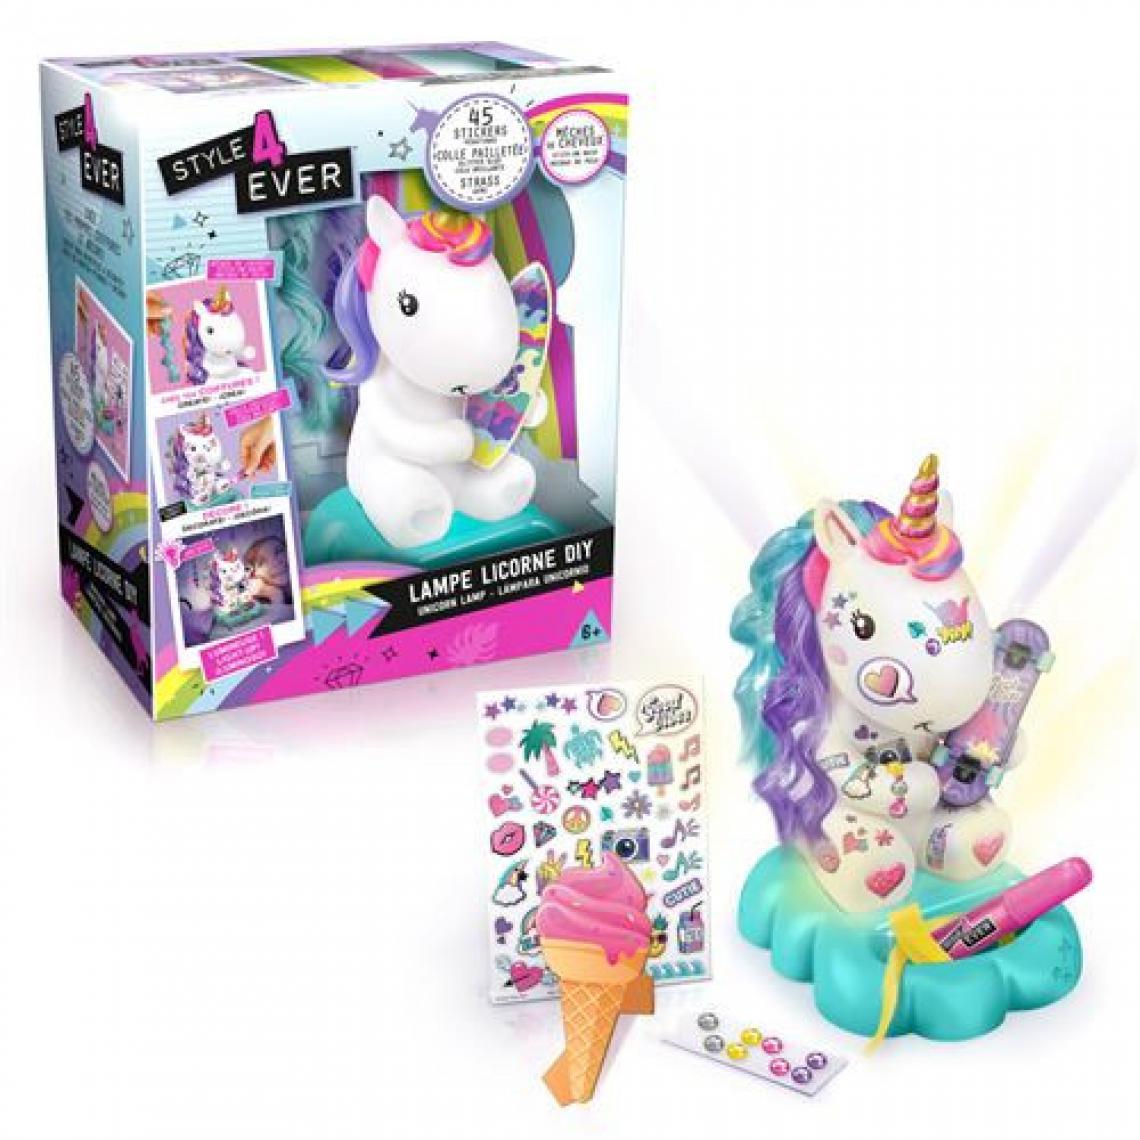 Canal Toys - Ma Peluche Licorne à customiser Style For Ever Airbrush - Dessin et peinture